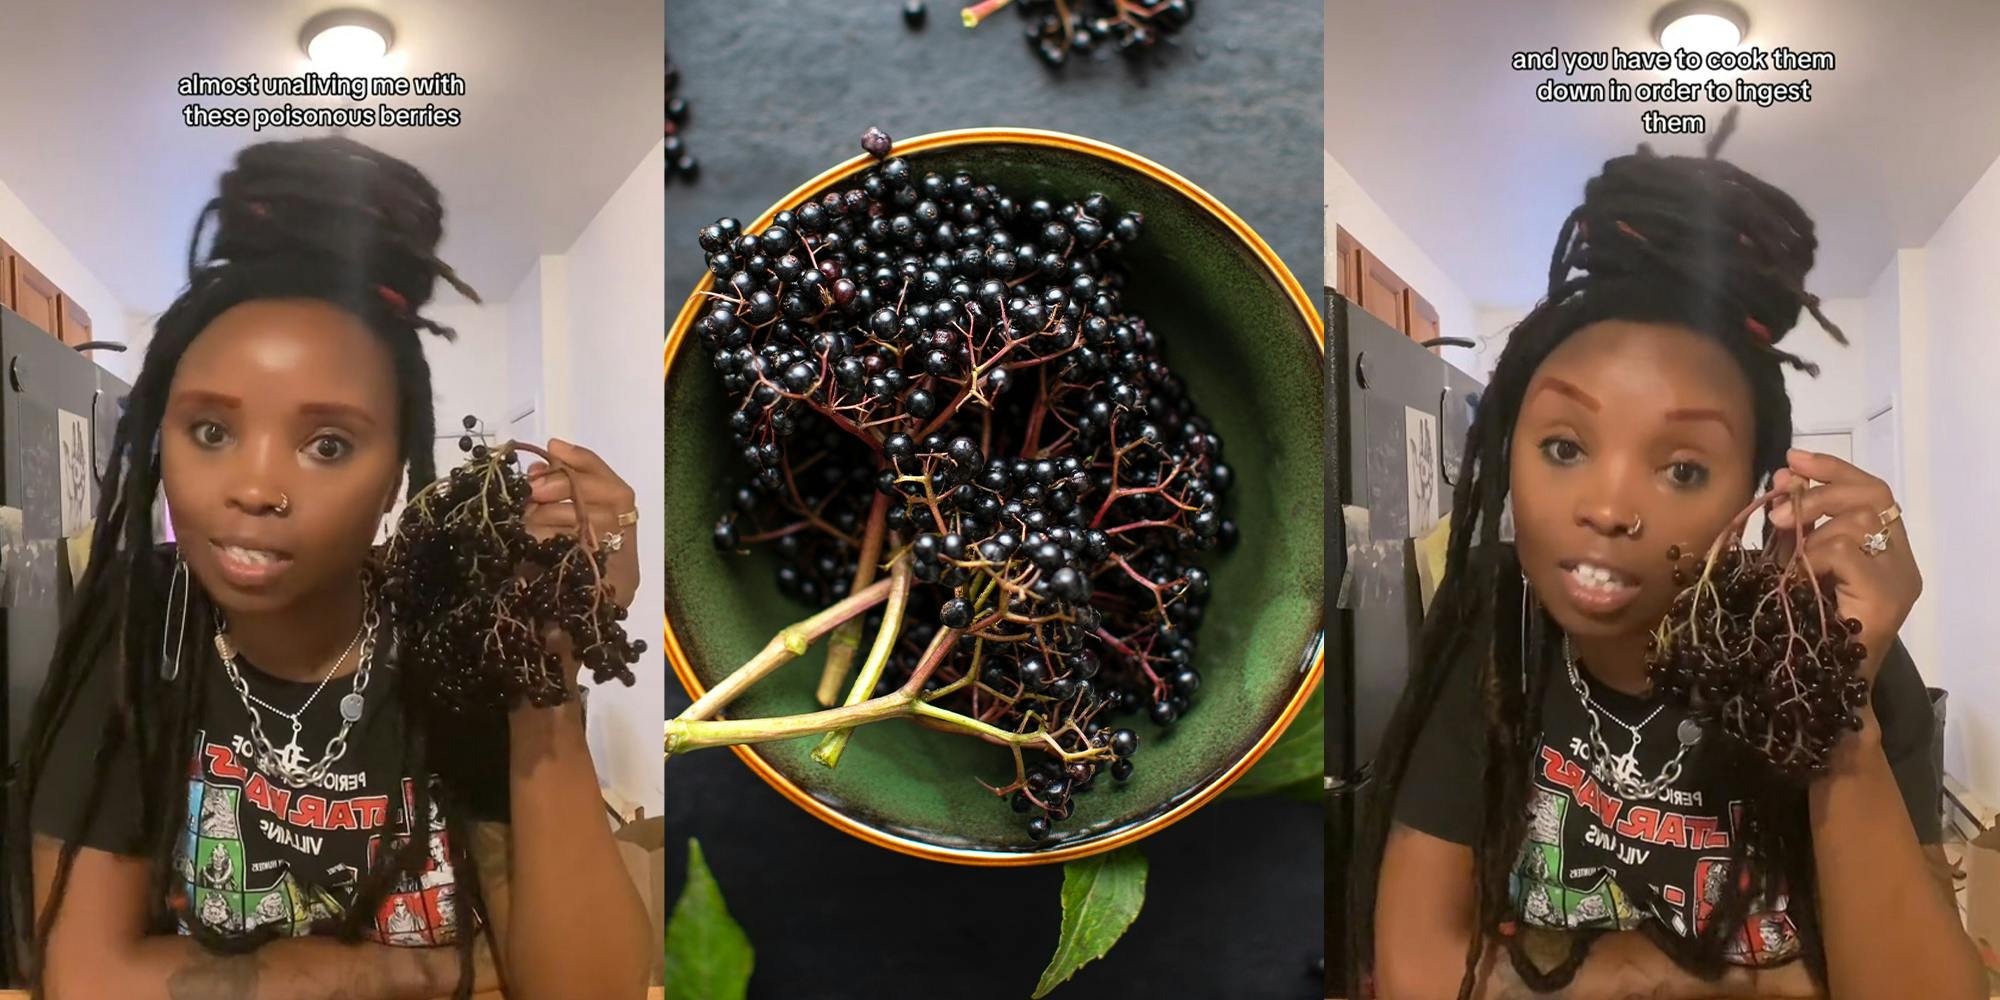 'These are just sitting on the shelf, no sign or warning': Shopper says grocery store almost poisoned her with elderberries